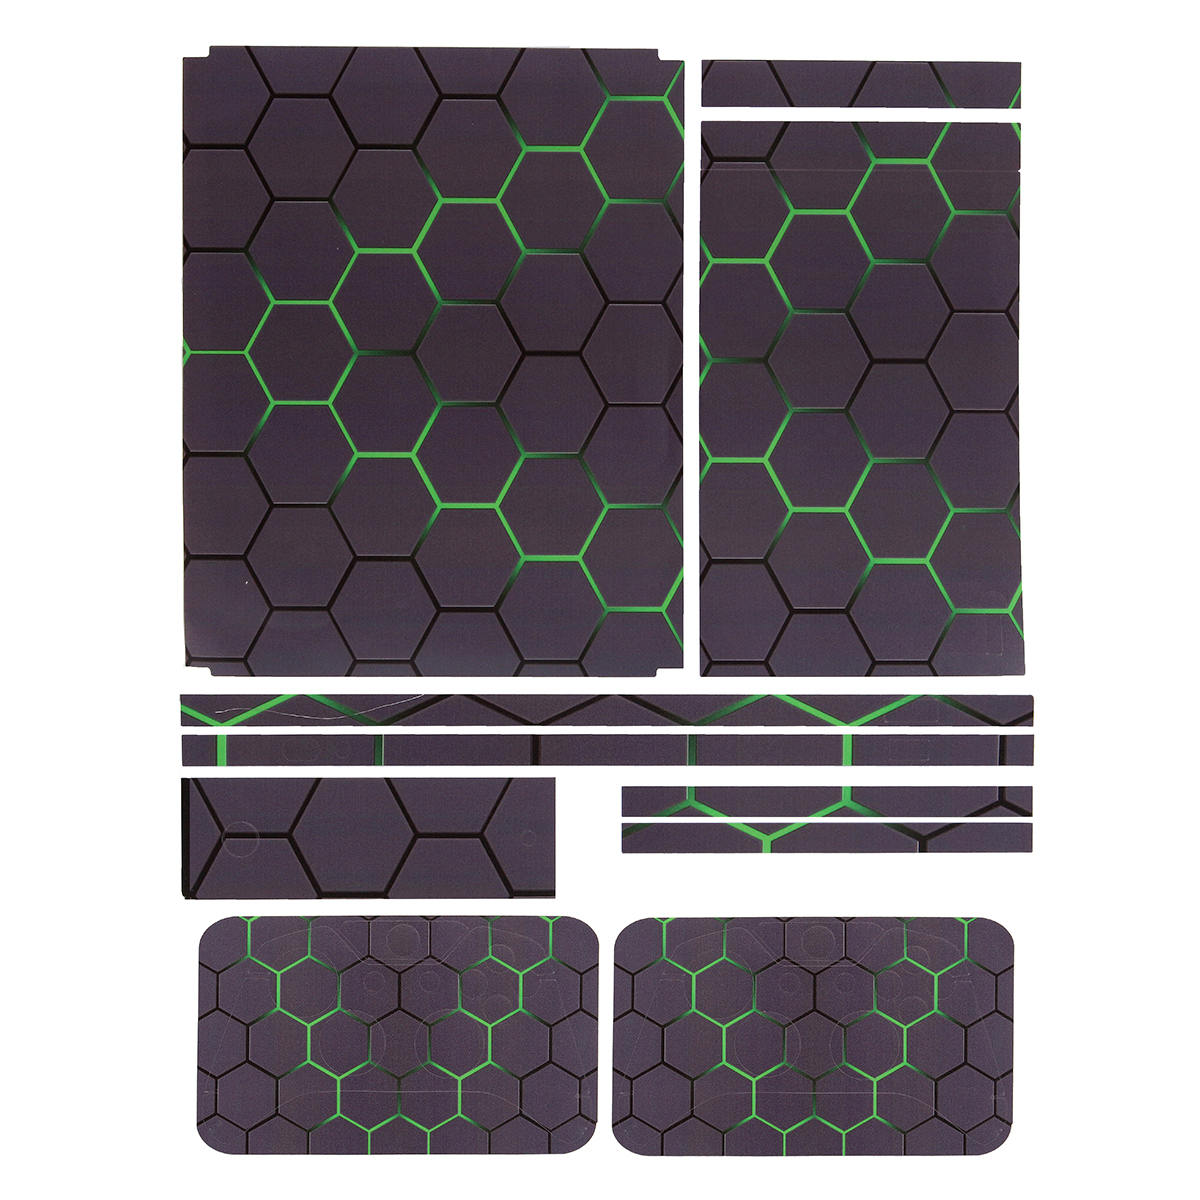 Green Grid Vinyl Decal Skin Stickers Cover for Xbox One S Game Console&2 Controllers 59